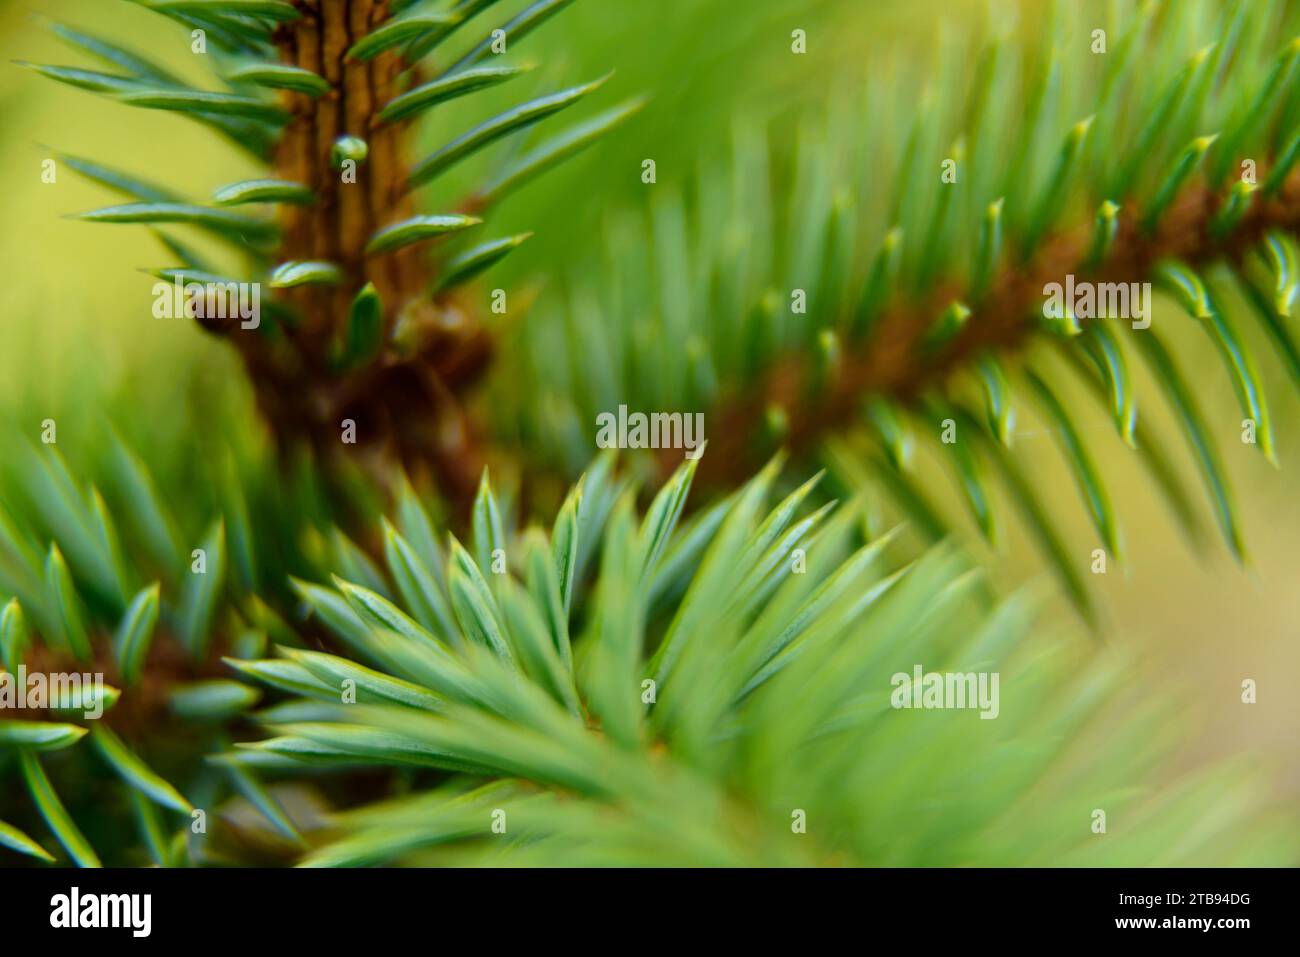 Close-up detail of a young sitka spruce tree (Picea sitchensis), the needles and branches; Inside Passage, Alaska, United States of America Stock Photo